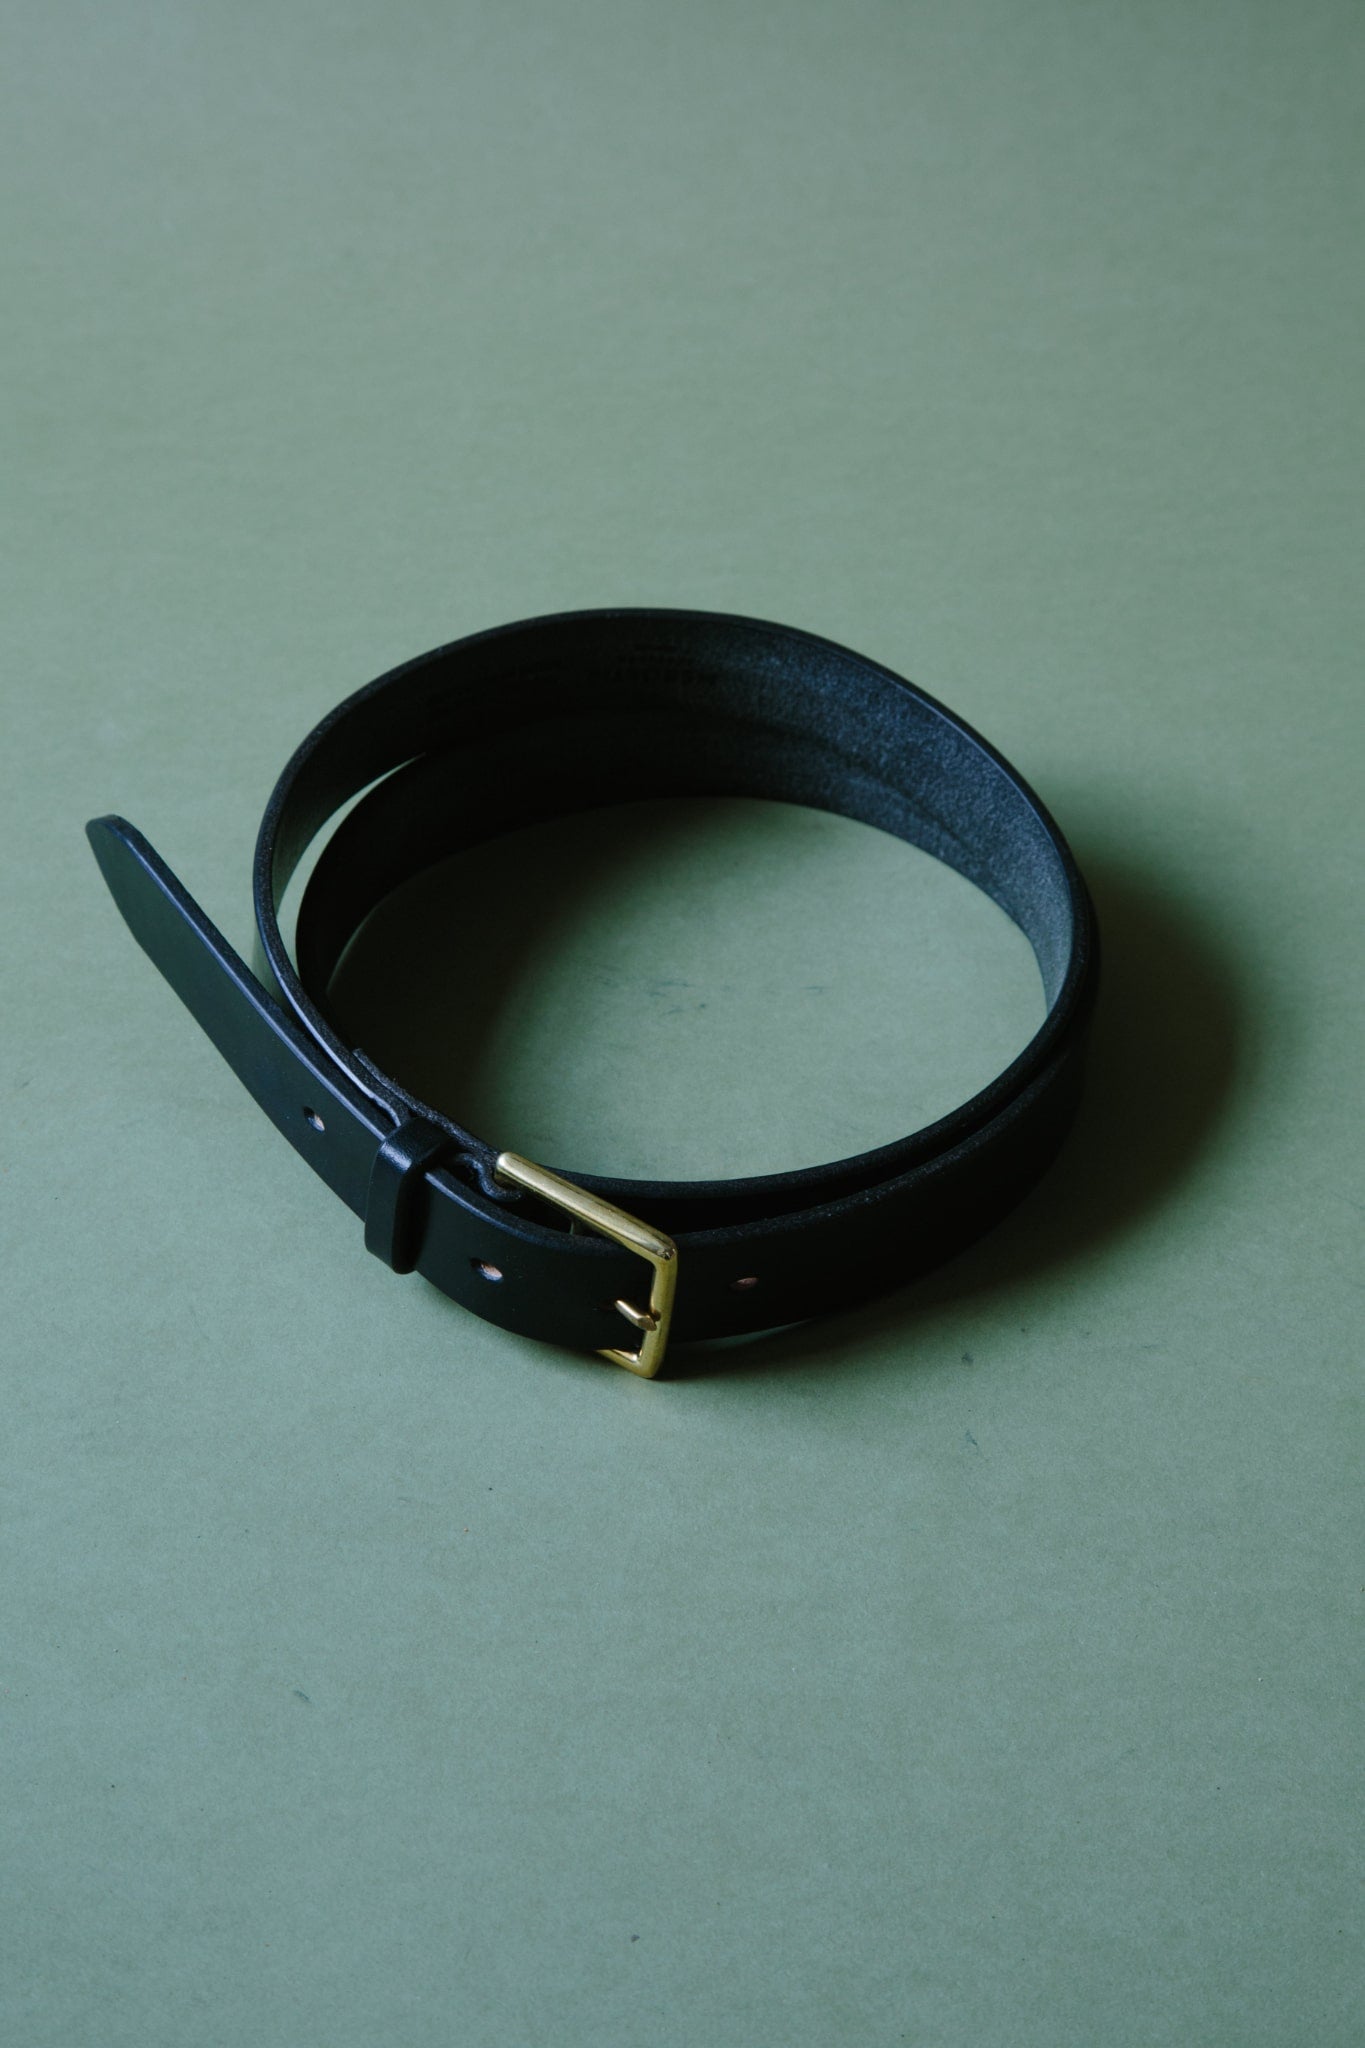 A black bridle leather belt, wrapped into a circle so it fits within frame. The metal belt is buckle can be seen.